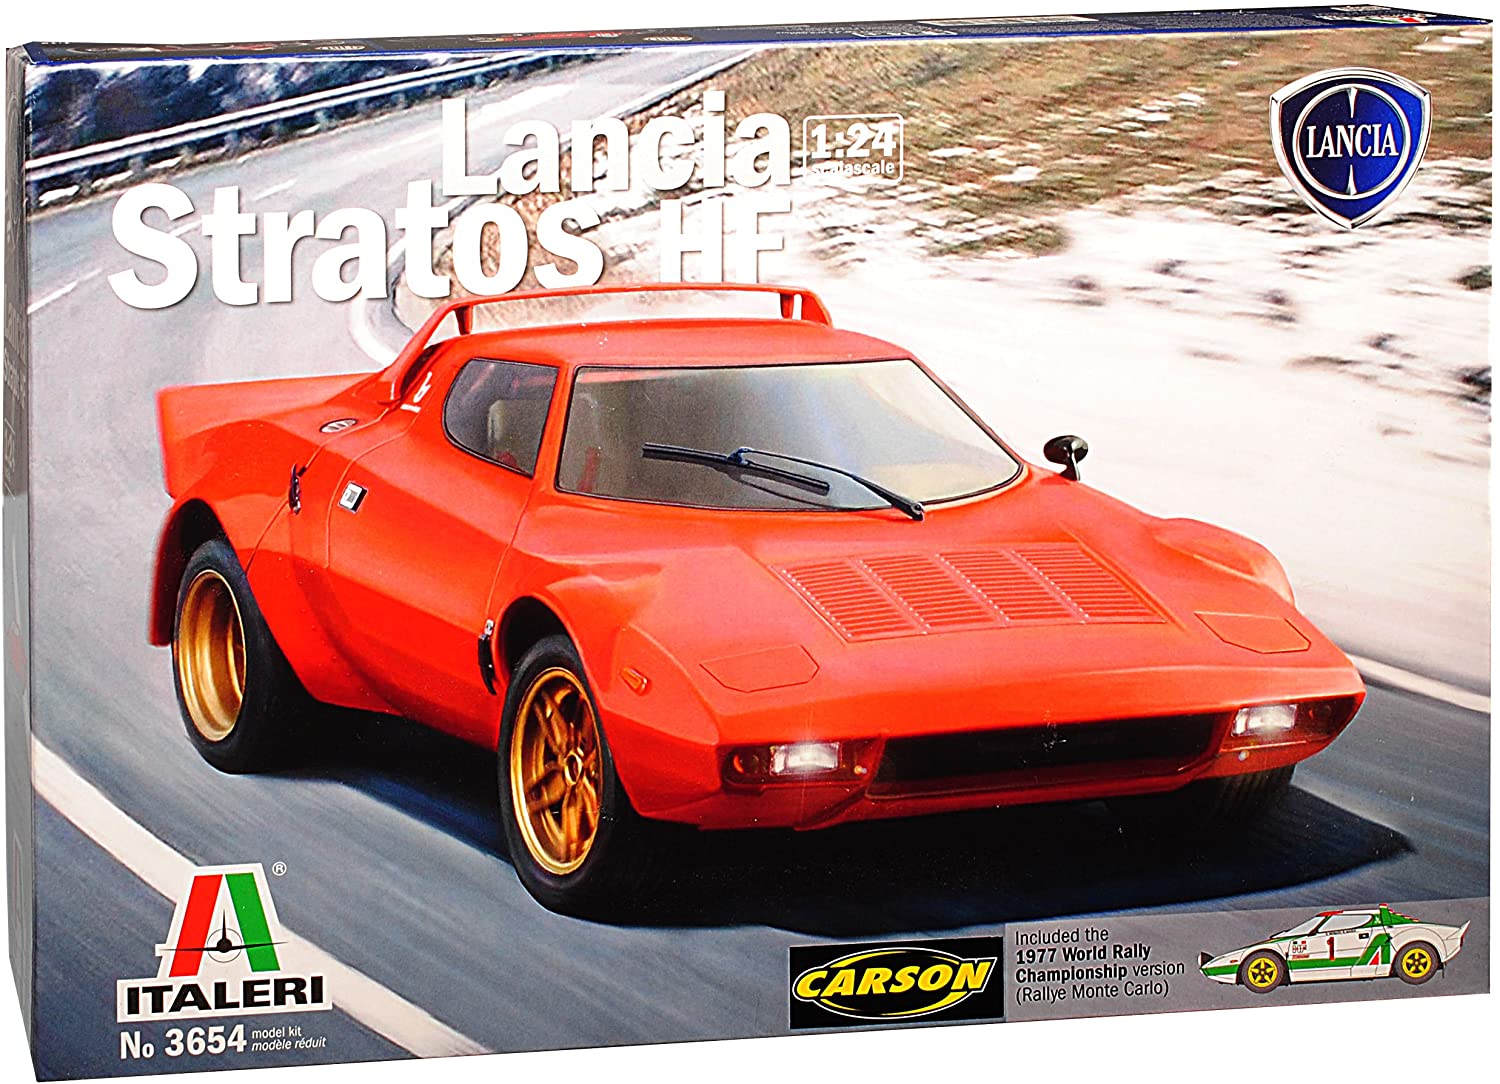 All Meine Gmbh Lancia Stratos Hf Rally Car Coupe Red Monte Carlo 1977 Wrc V